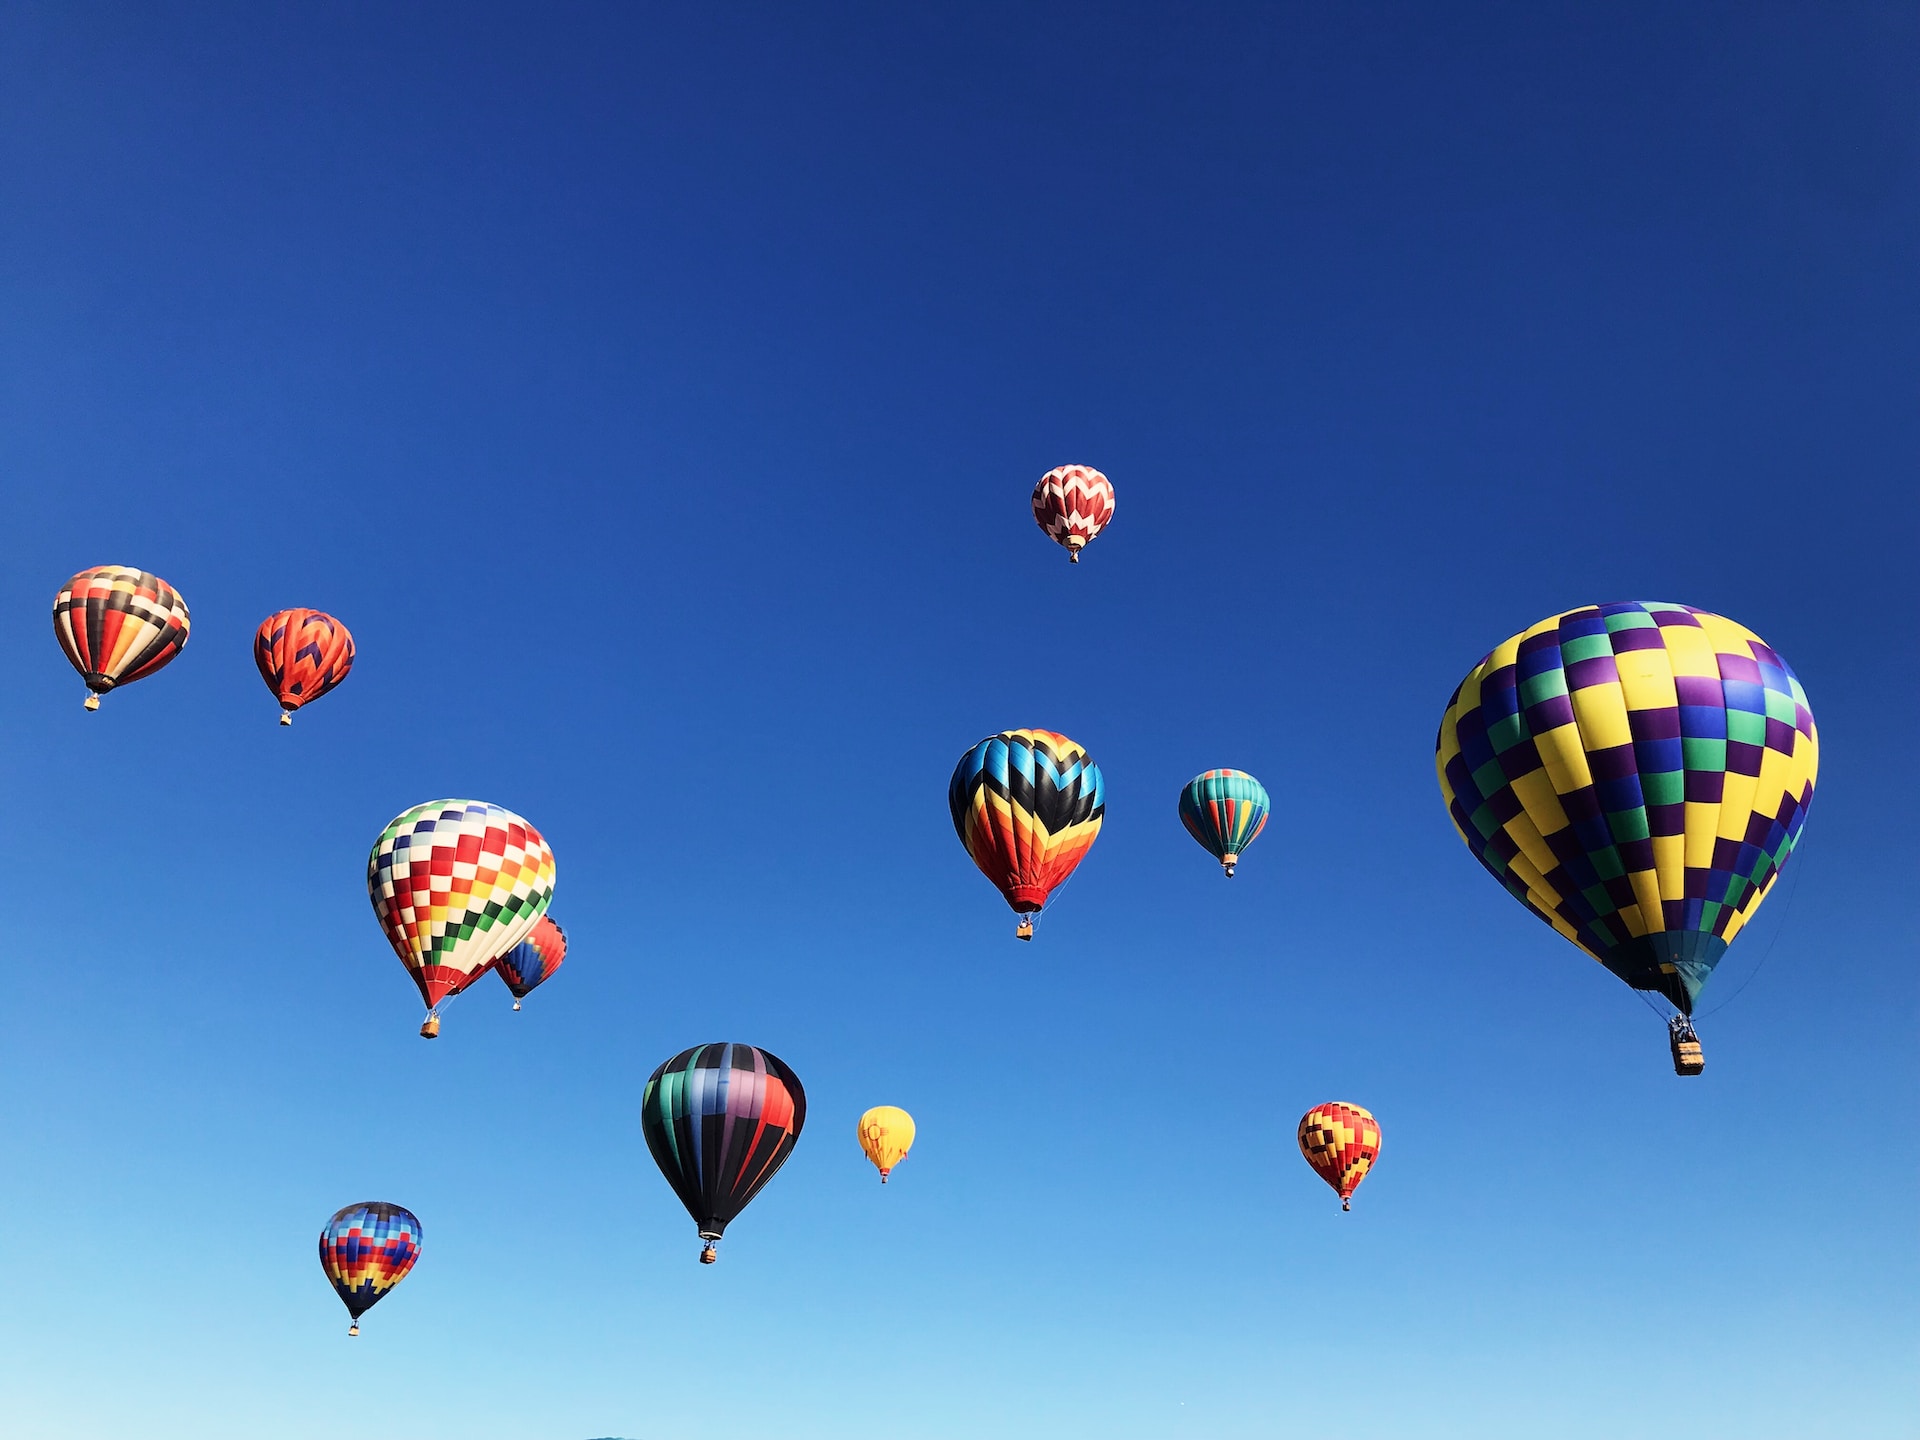 Hot air balloons taking to the skies in Pagosa Springs.